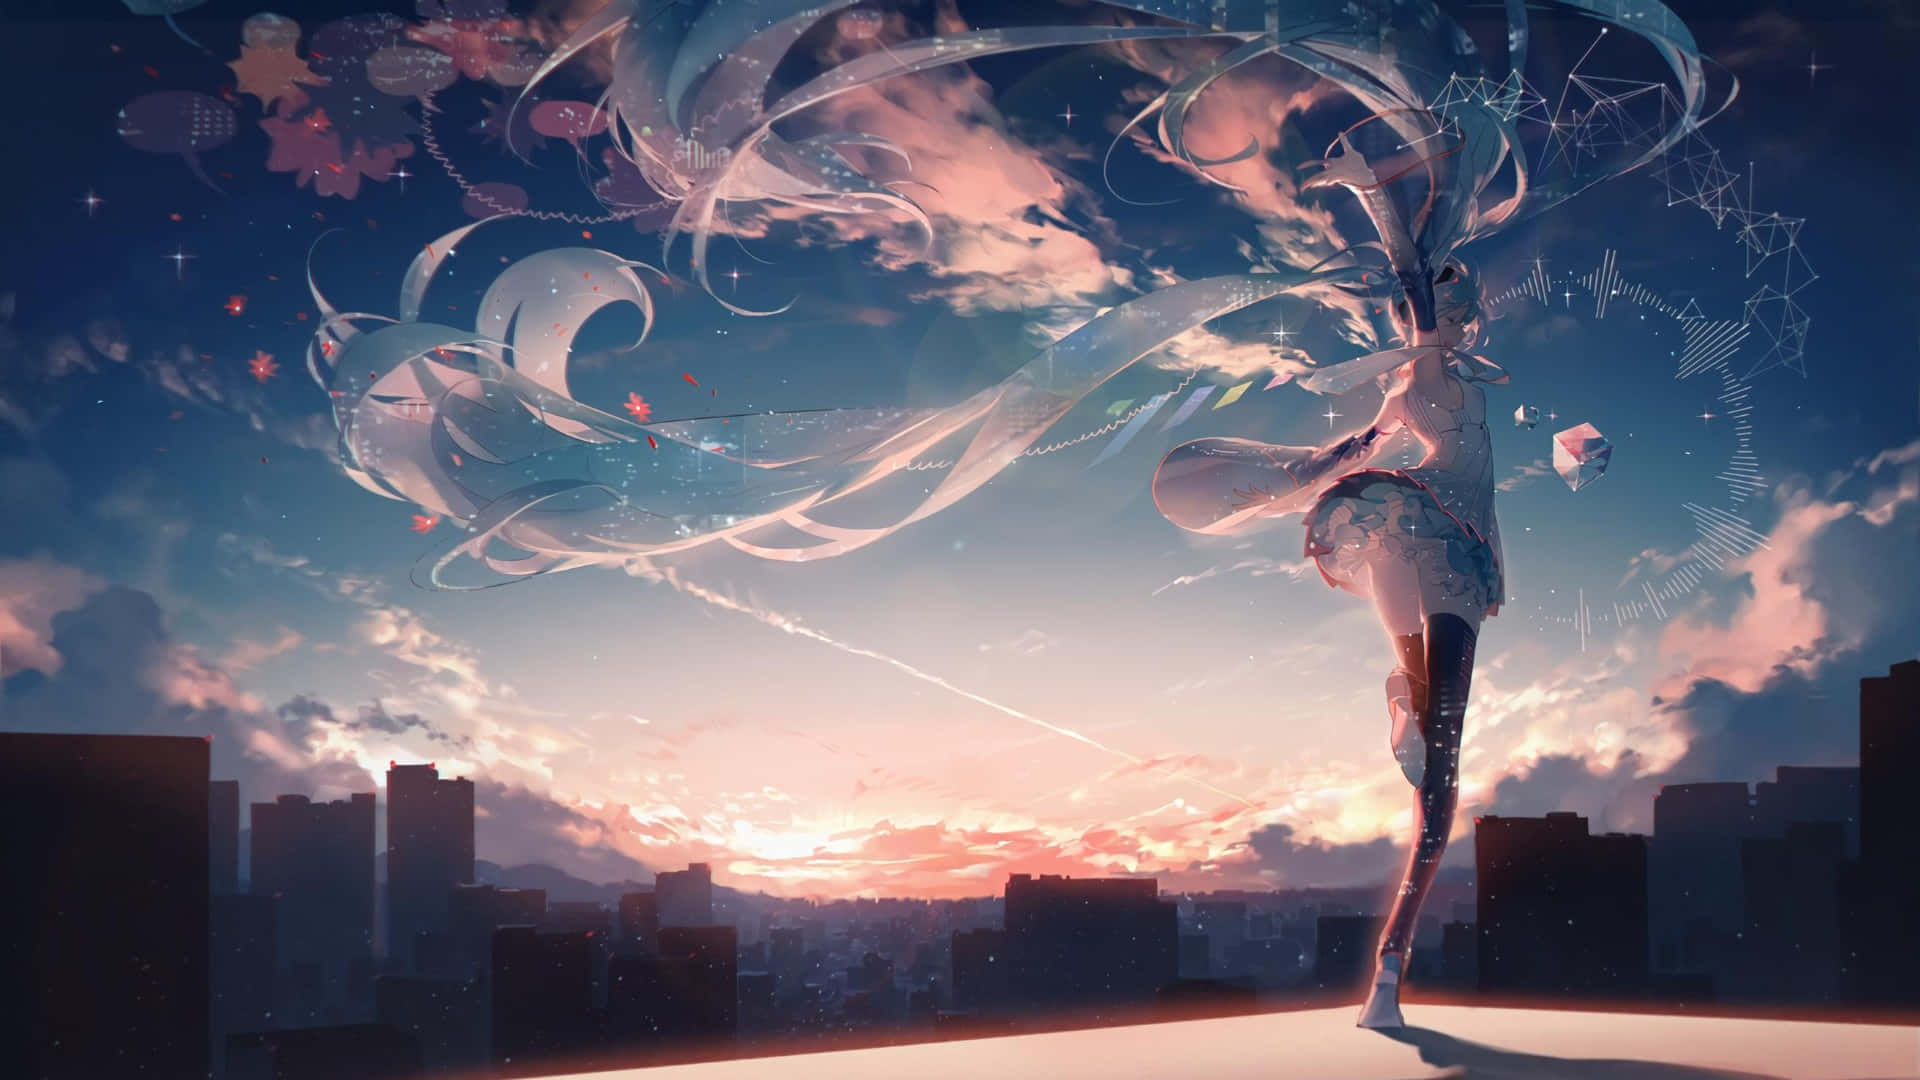 "Follow Your Dreams With an Anime Aesthetic" Wallpaper